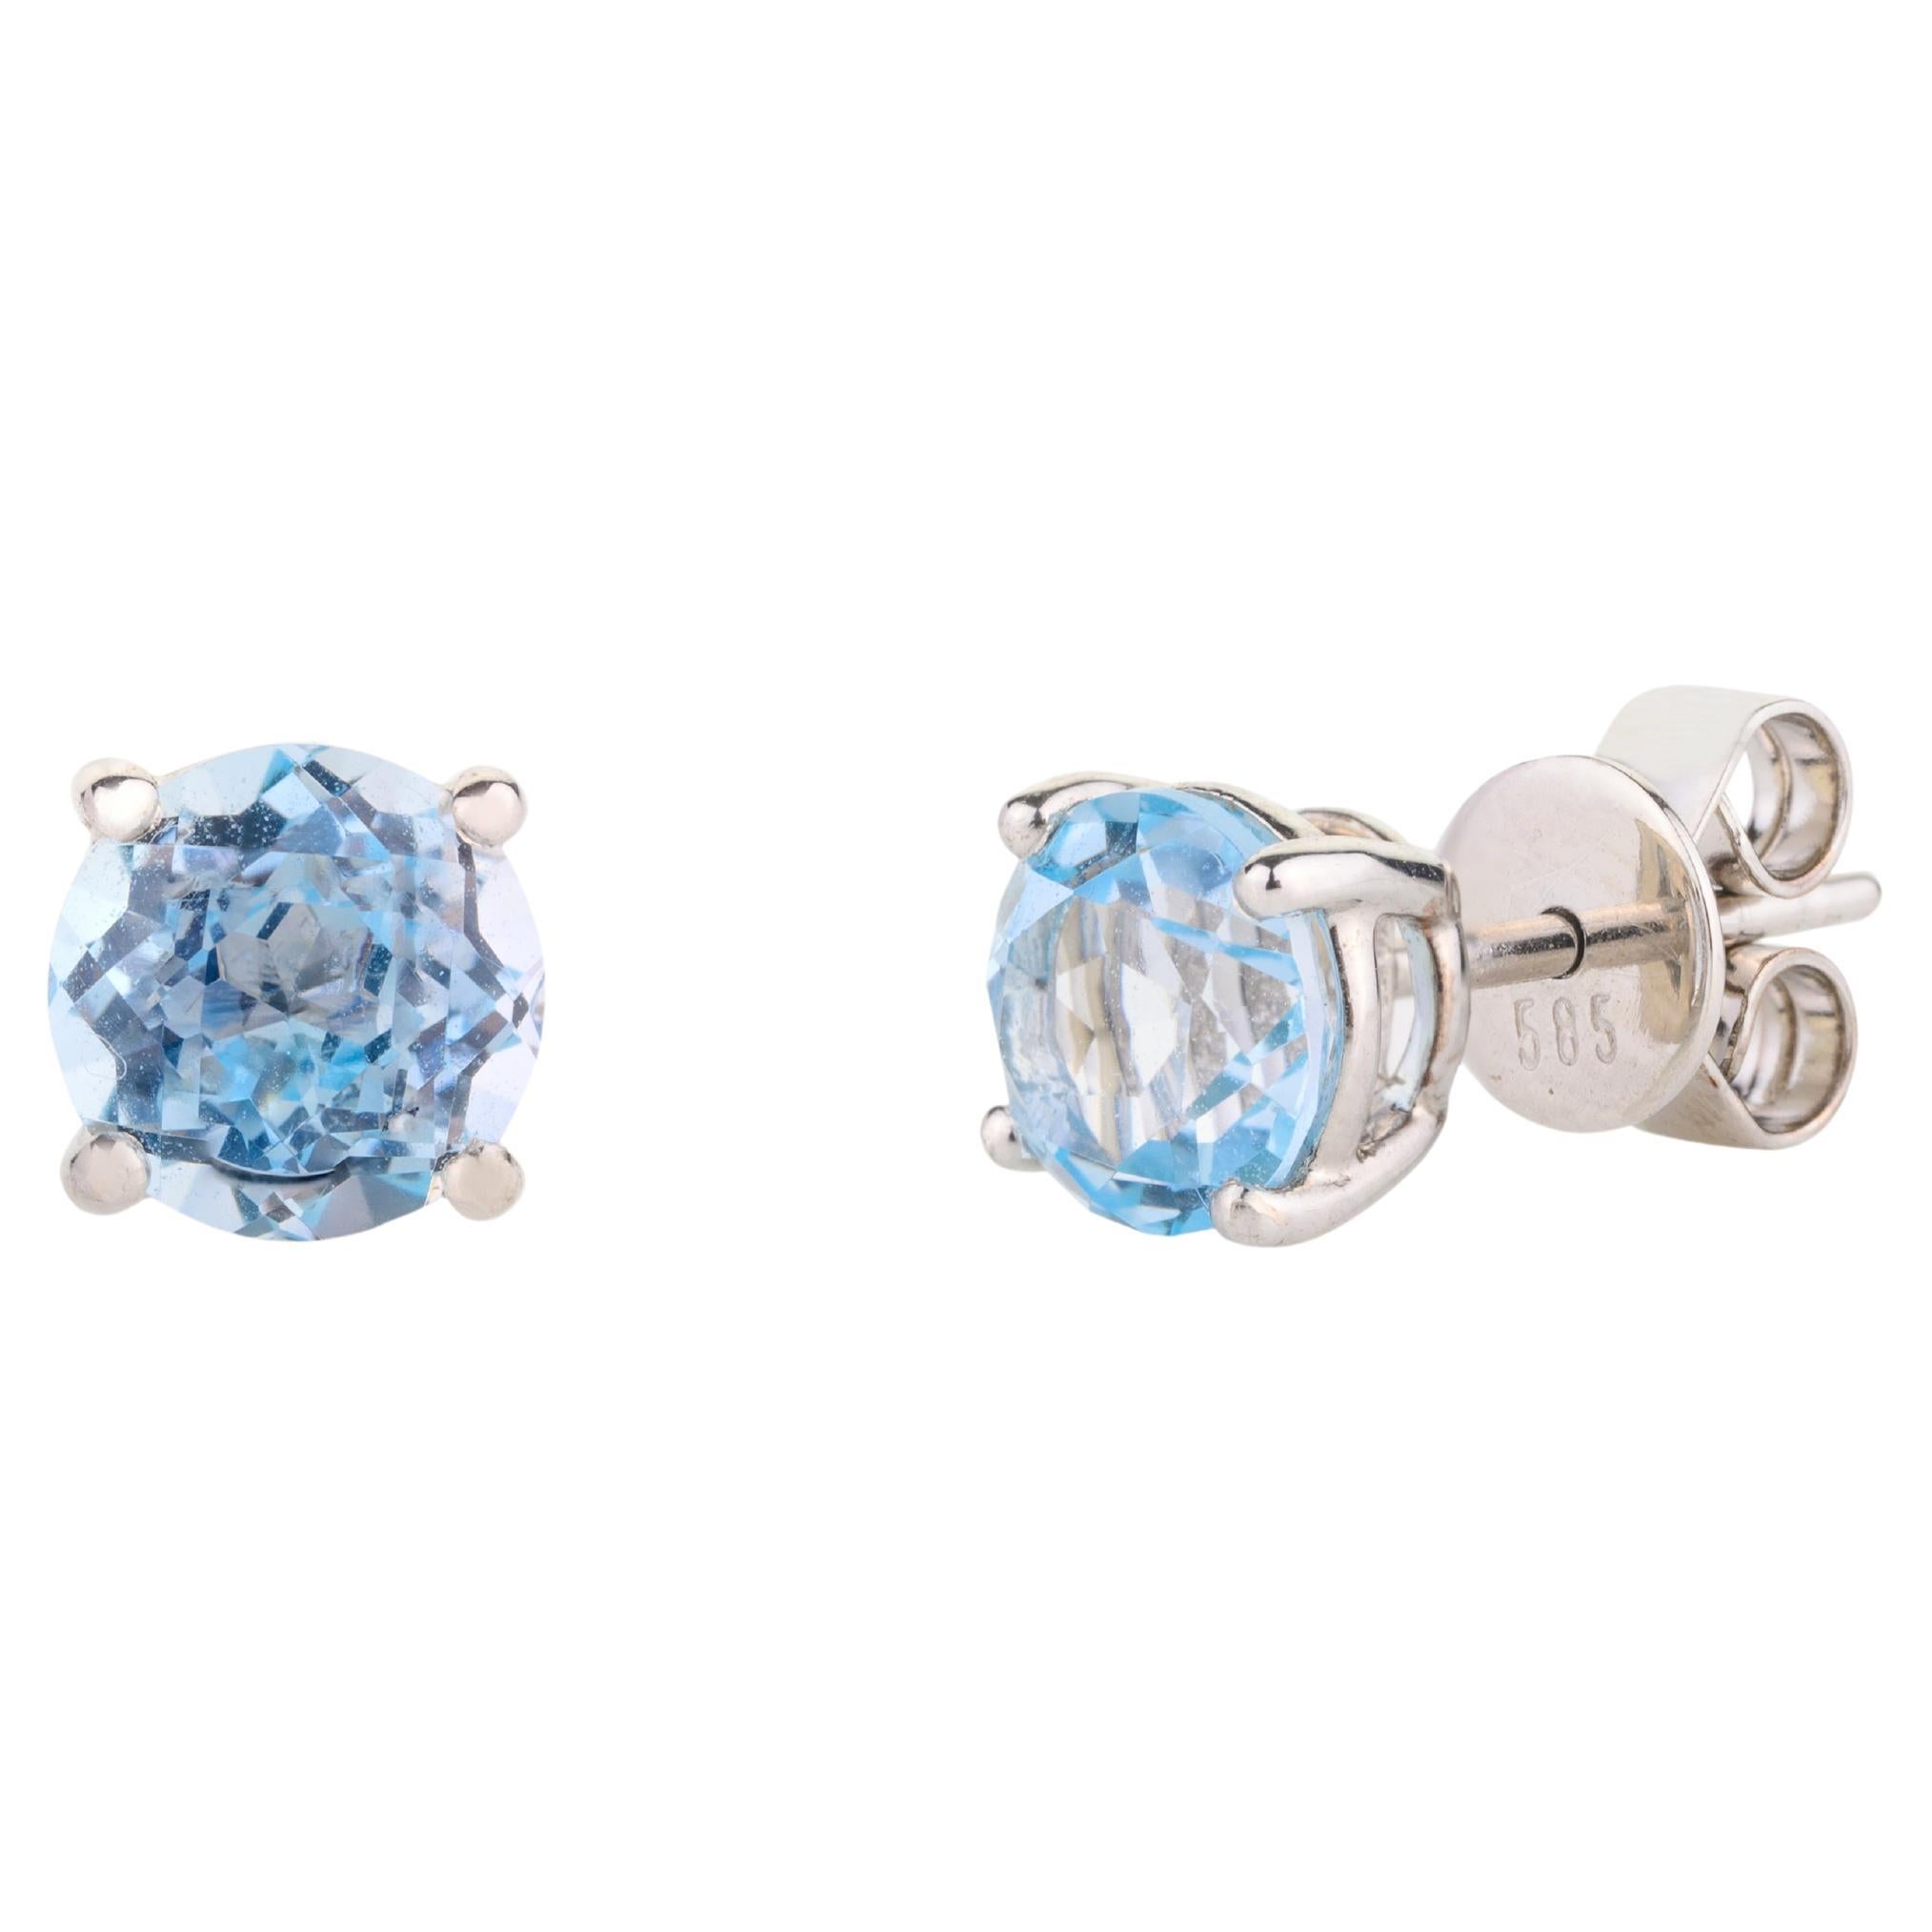 Enchanting 14k Solid White Gold Dainty Round Blue Topaz Stud Earrings For Sale